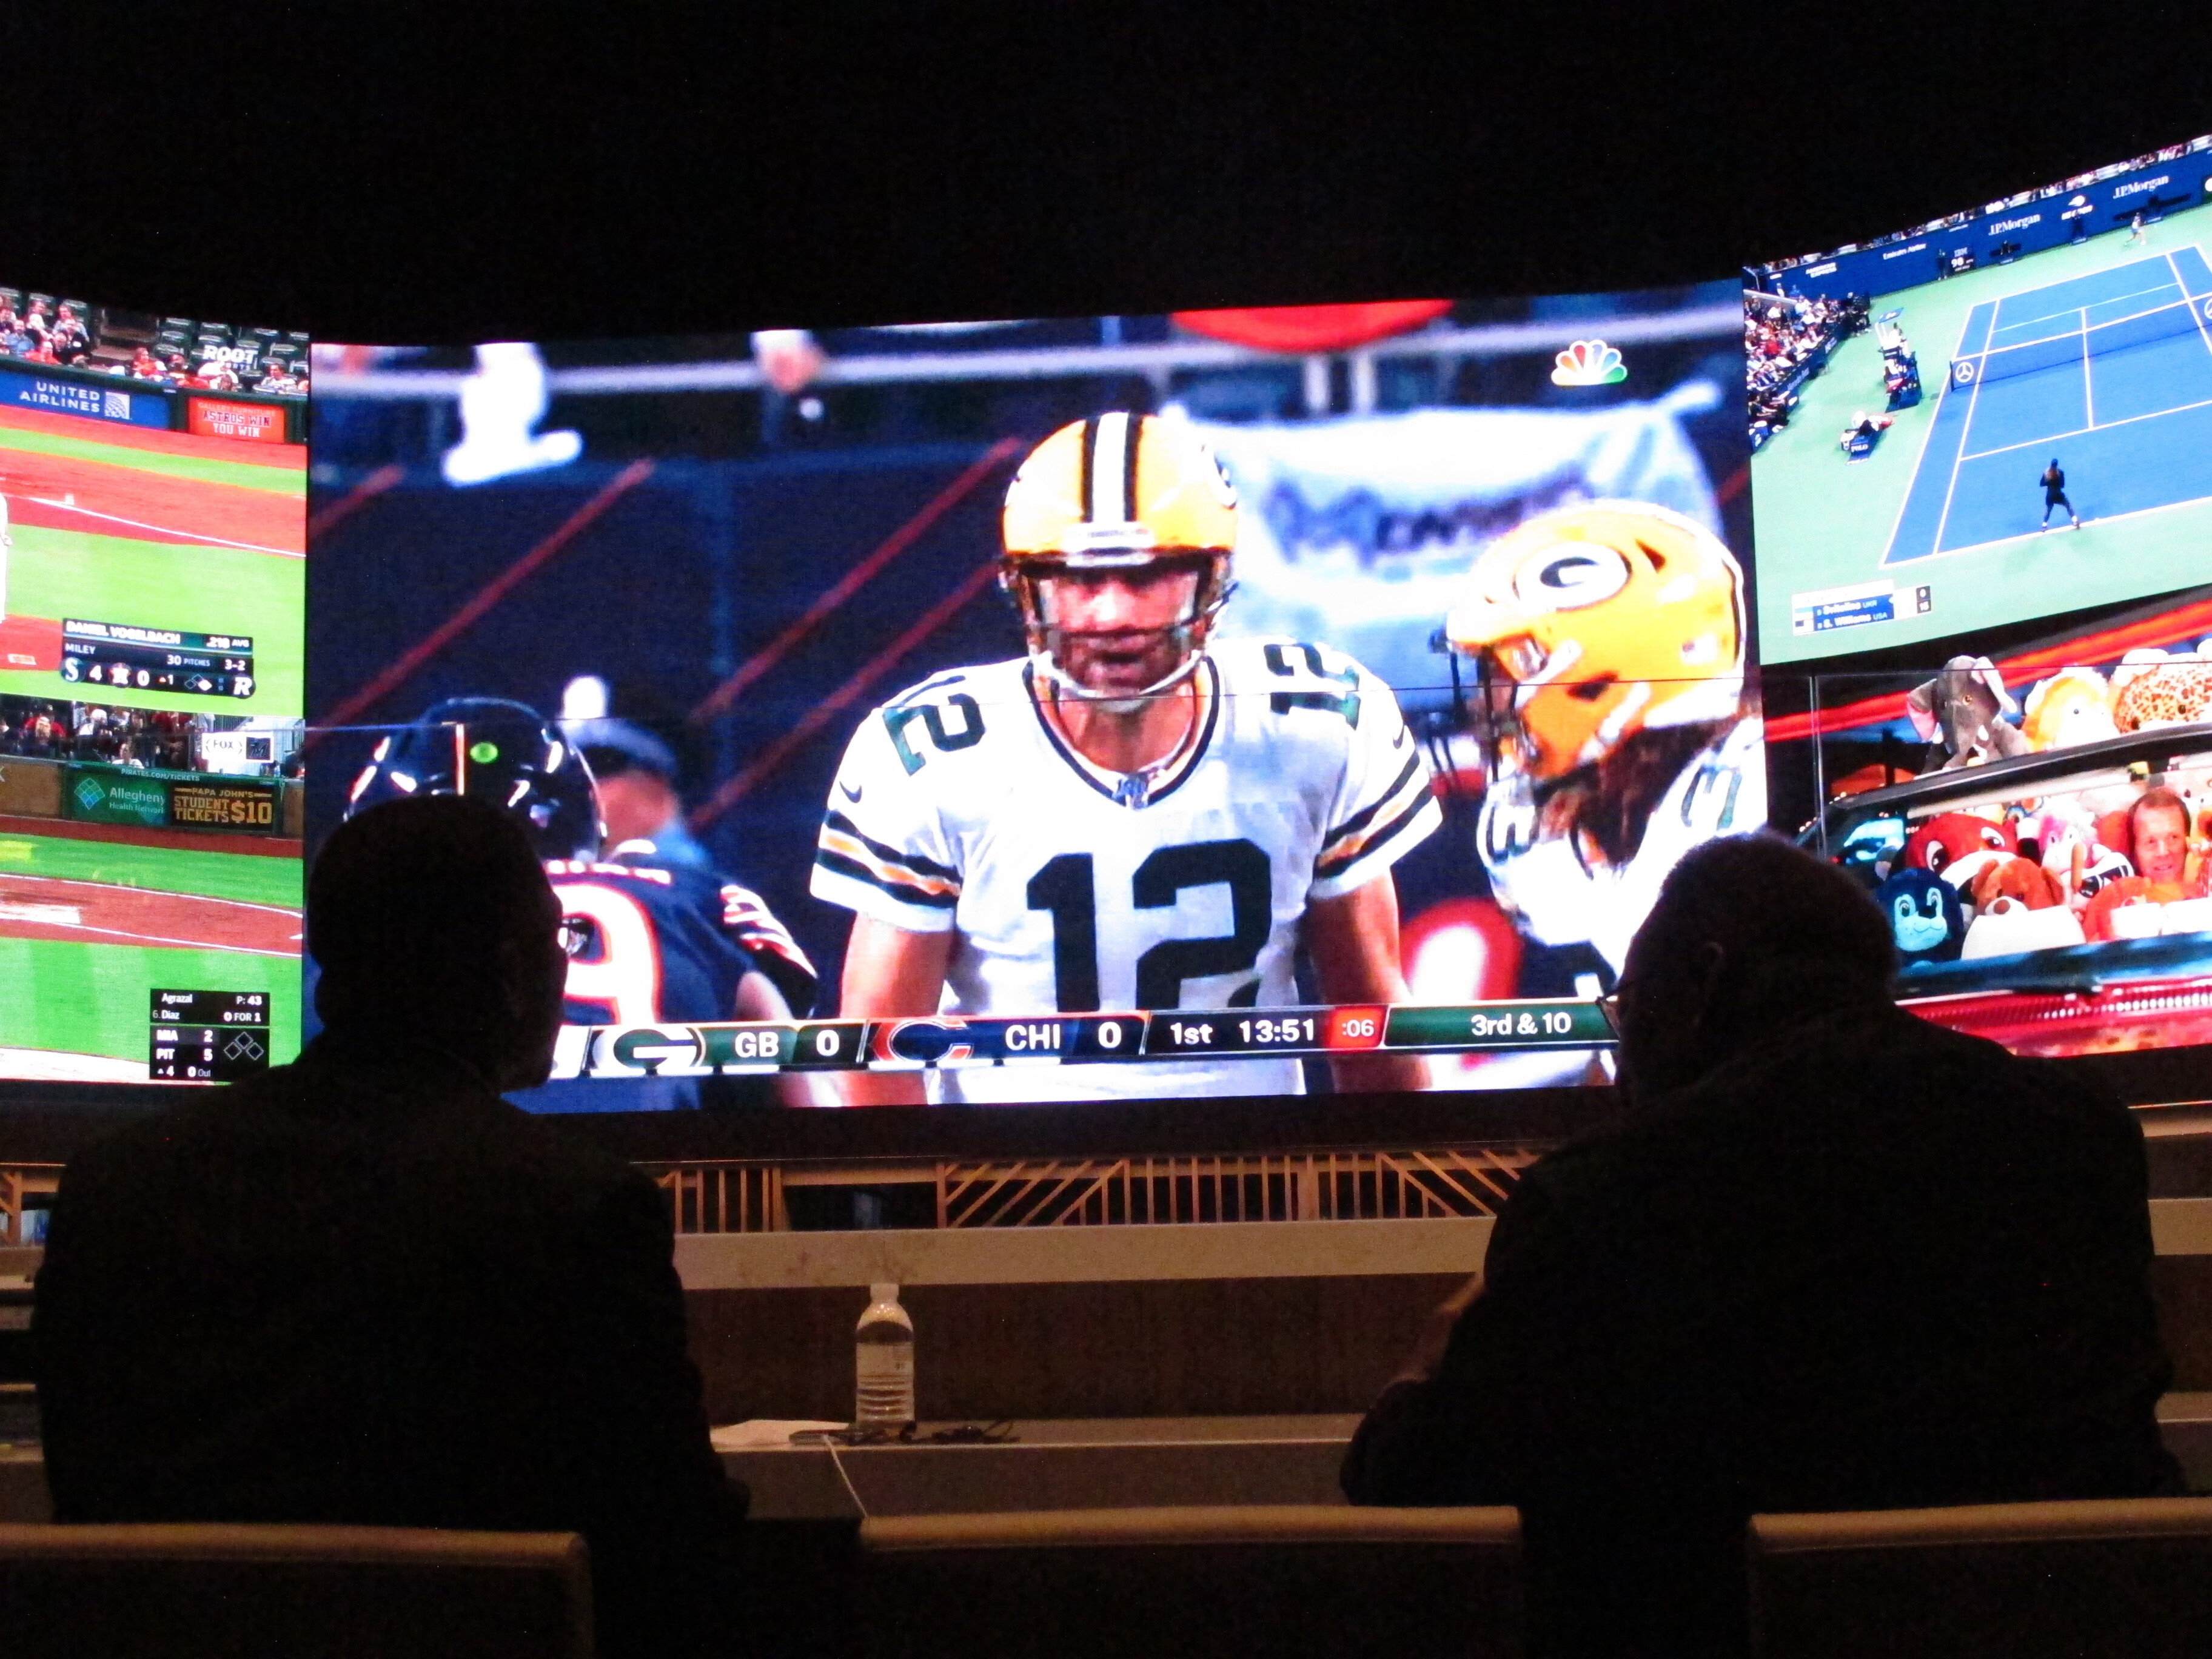 DraftKings plans sports betting bars in Detroit area, pending approval